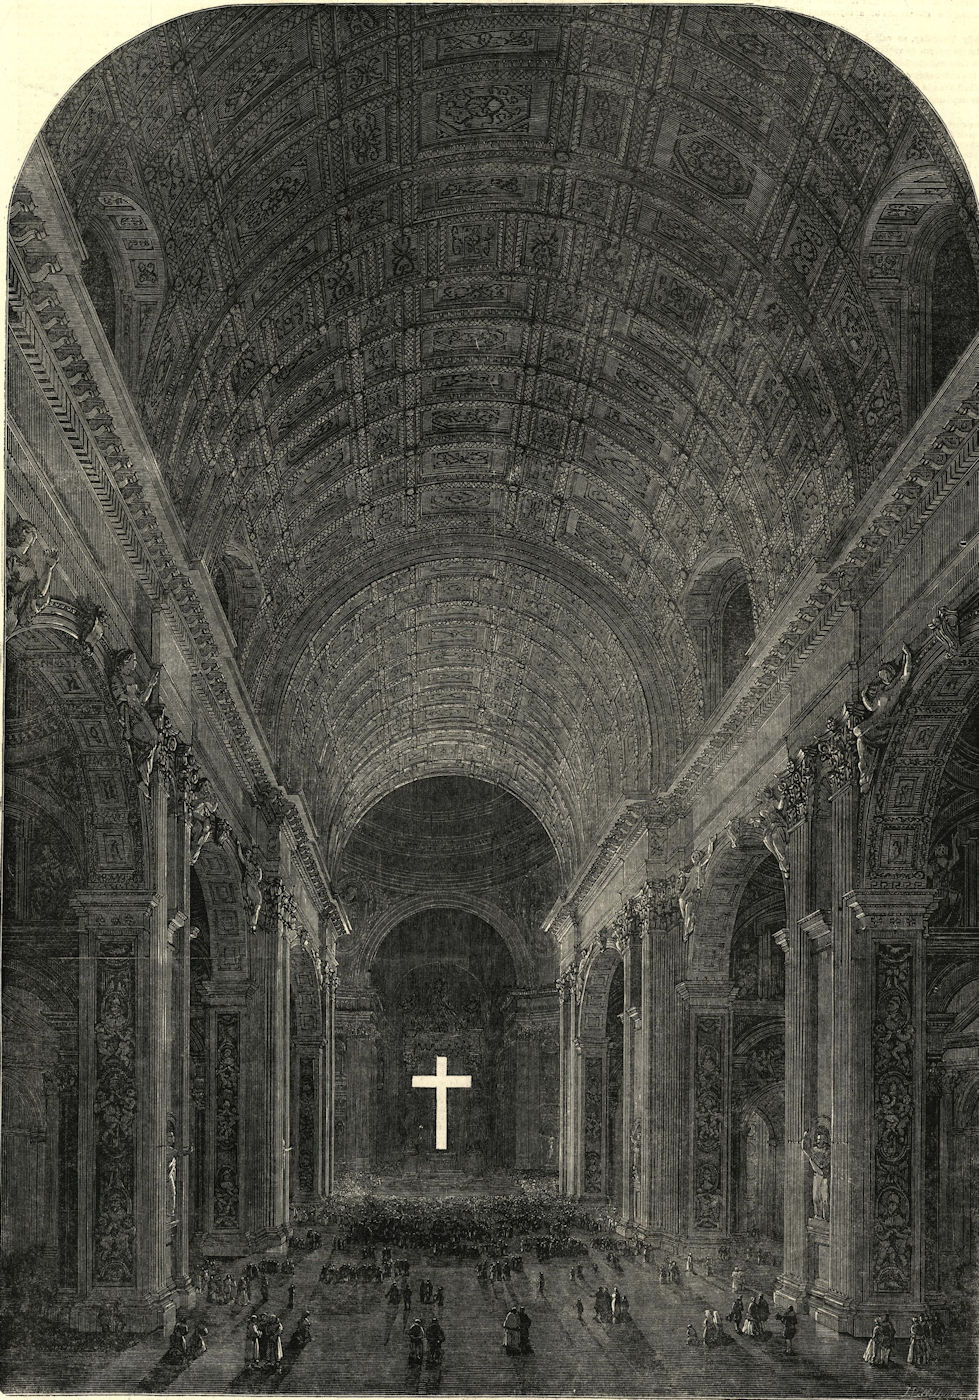 Associate Product The cross of fire, In St. Peter's at Rome, on Maundy Thursday. Churches 1852